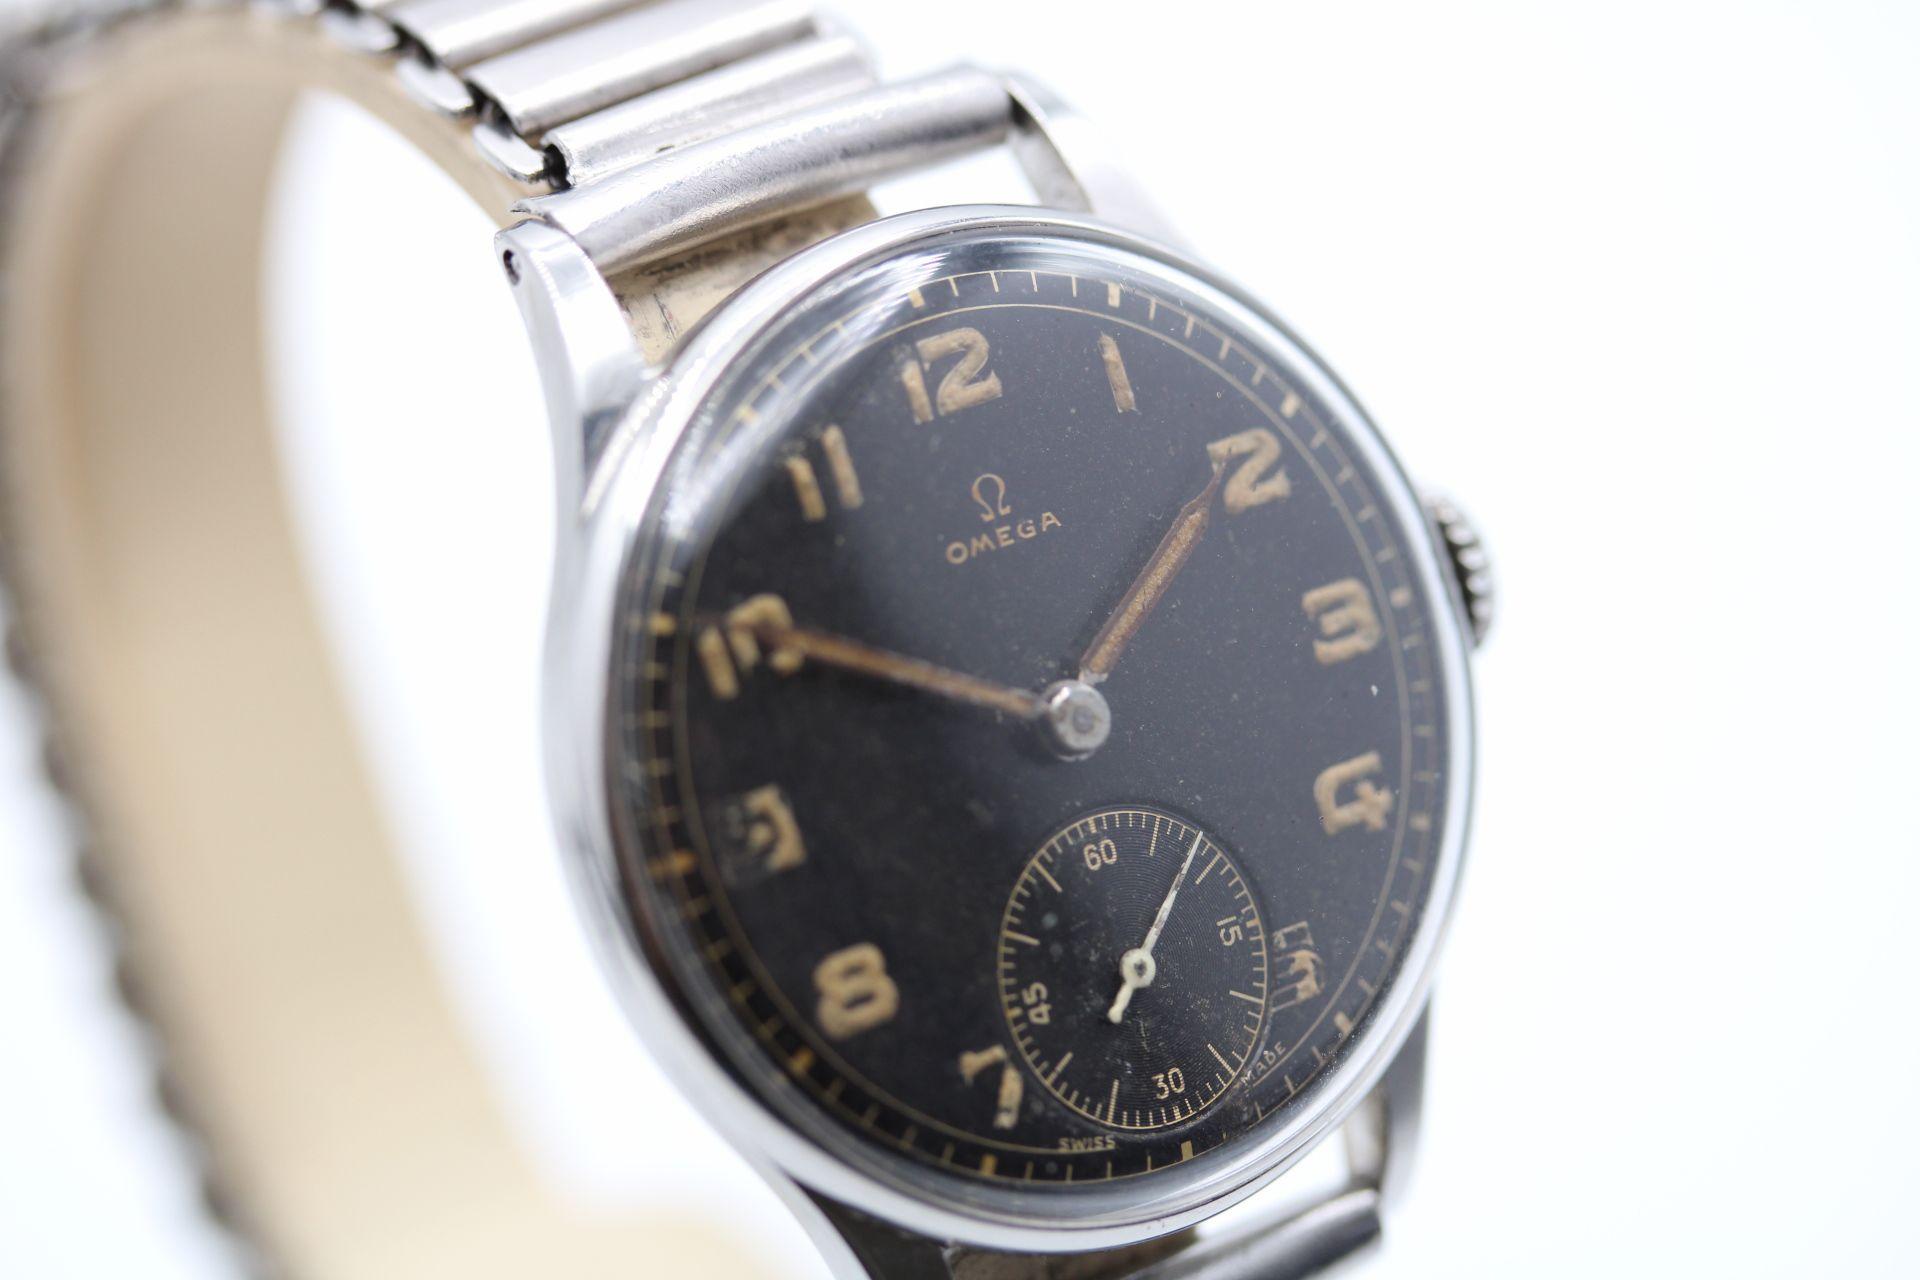 Omega Black Gilt dial from approximately the 1940’s, a really stunning example of an early Omega that has kept its originality with the dial although naturally aged and discoloured in places largely left untouched. Small steel case measuring